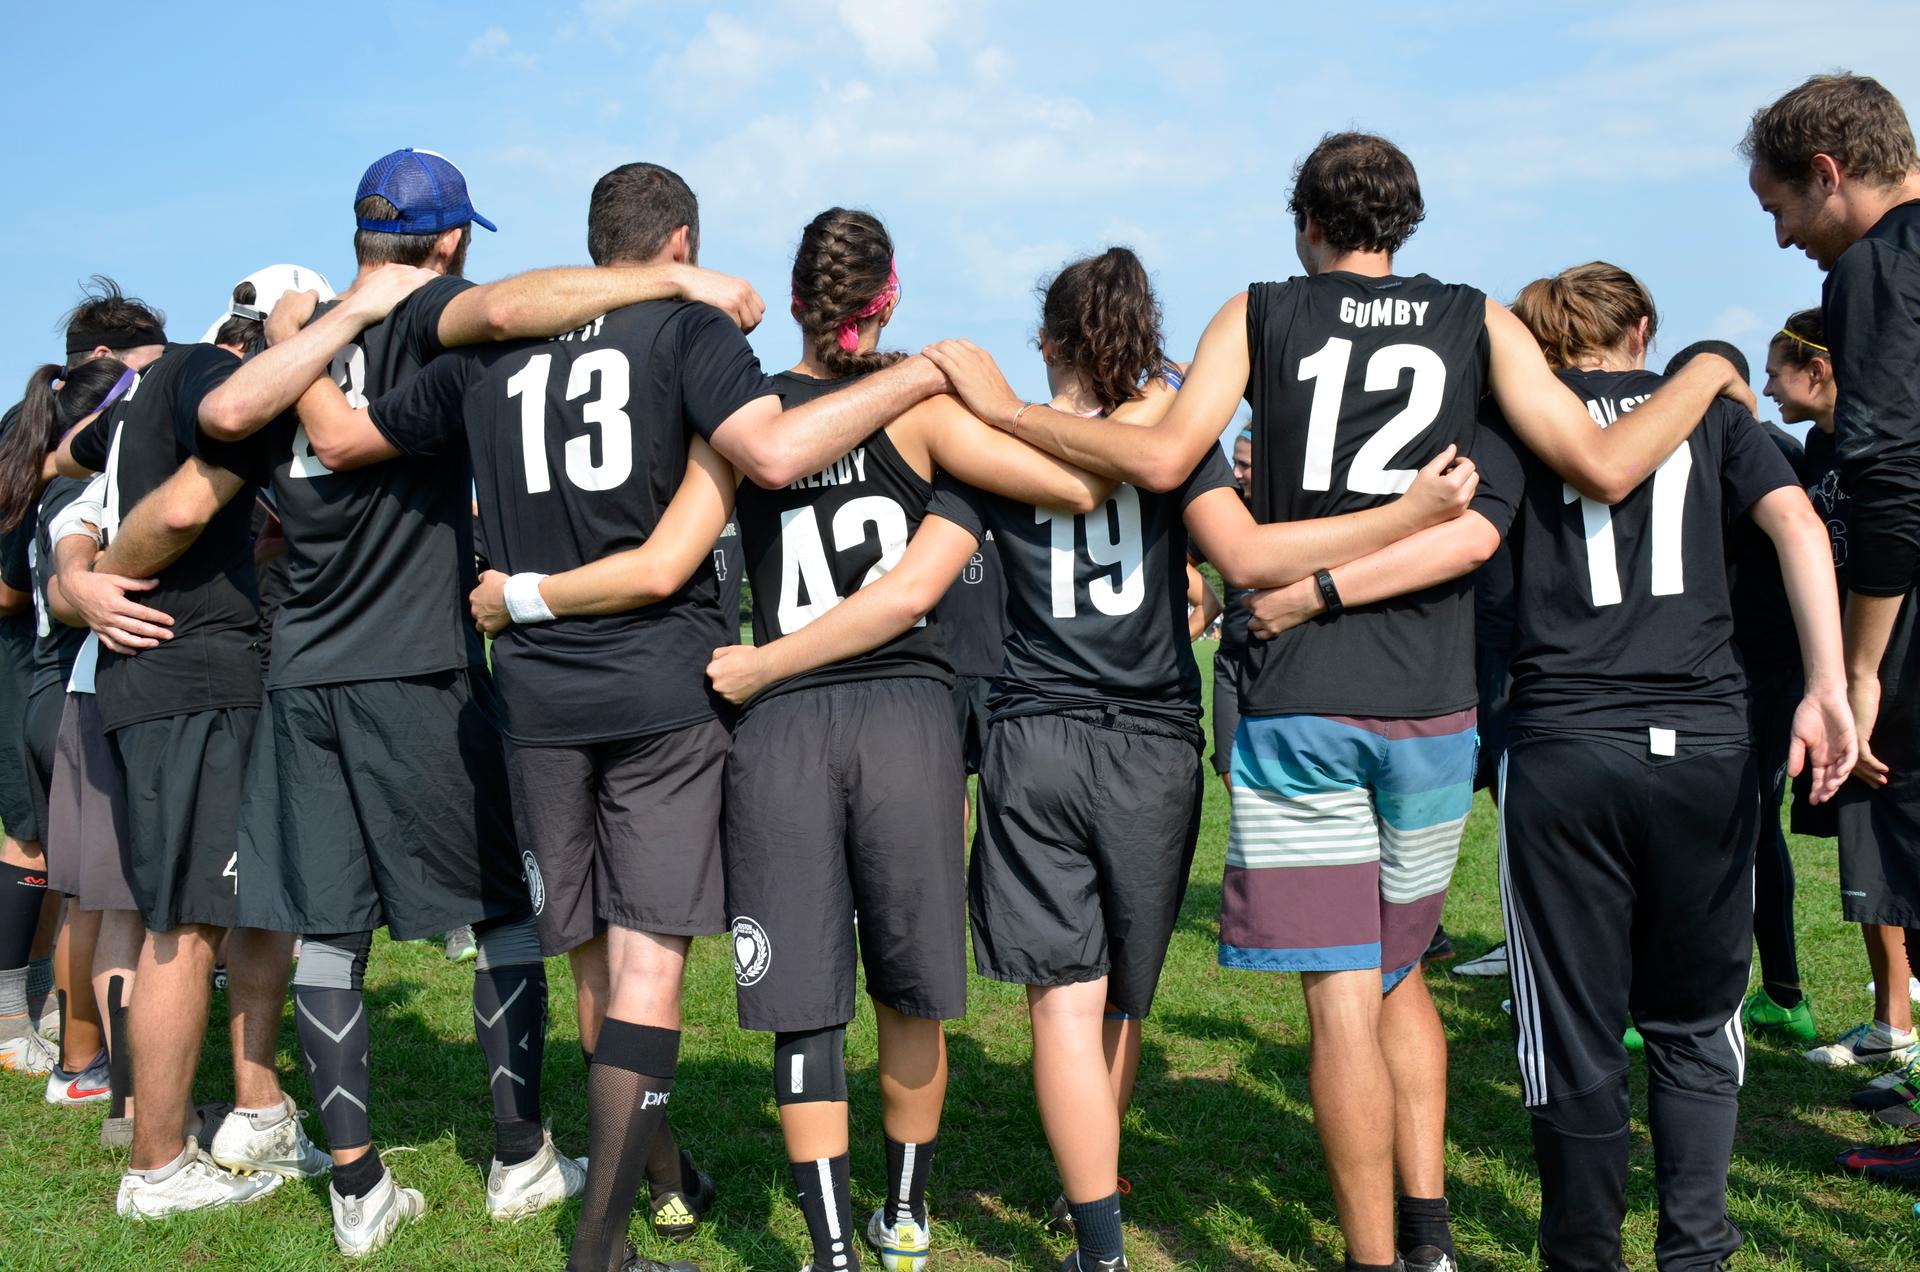 Members of Boston Slow White, the second-ranked mixed Ultimate team in the US.